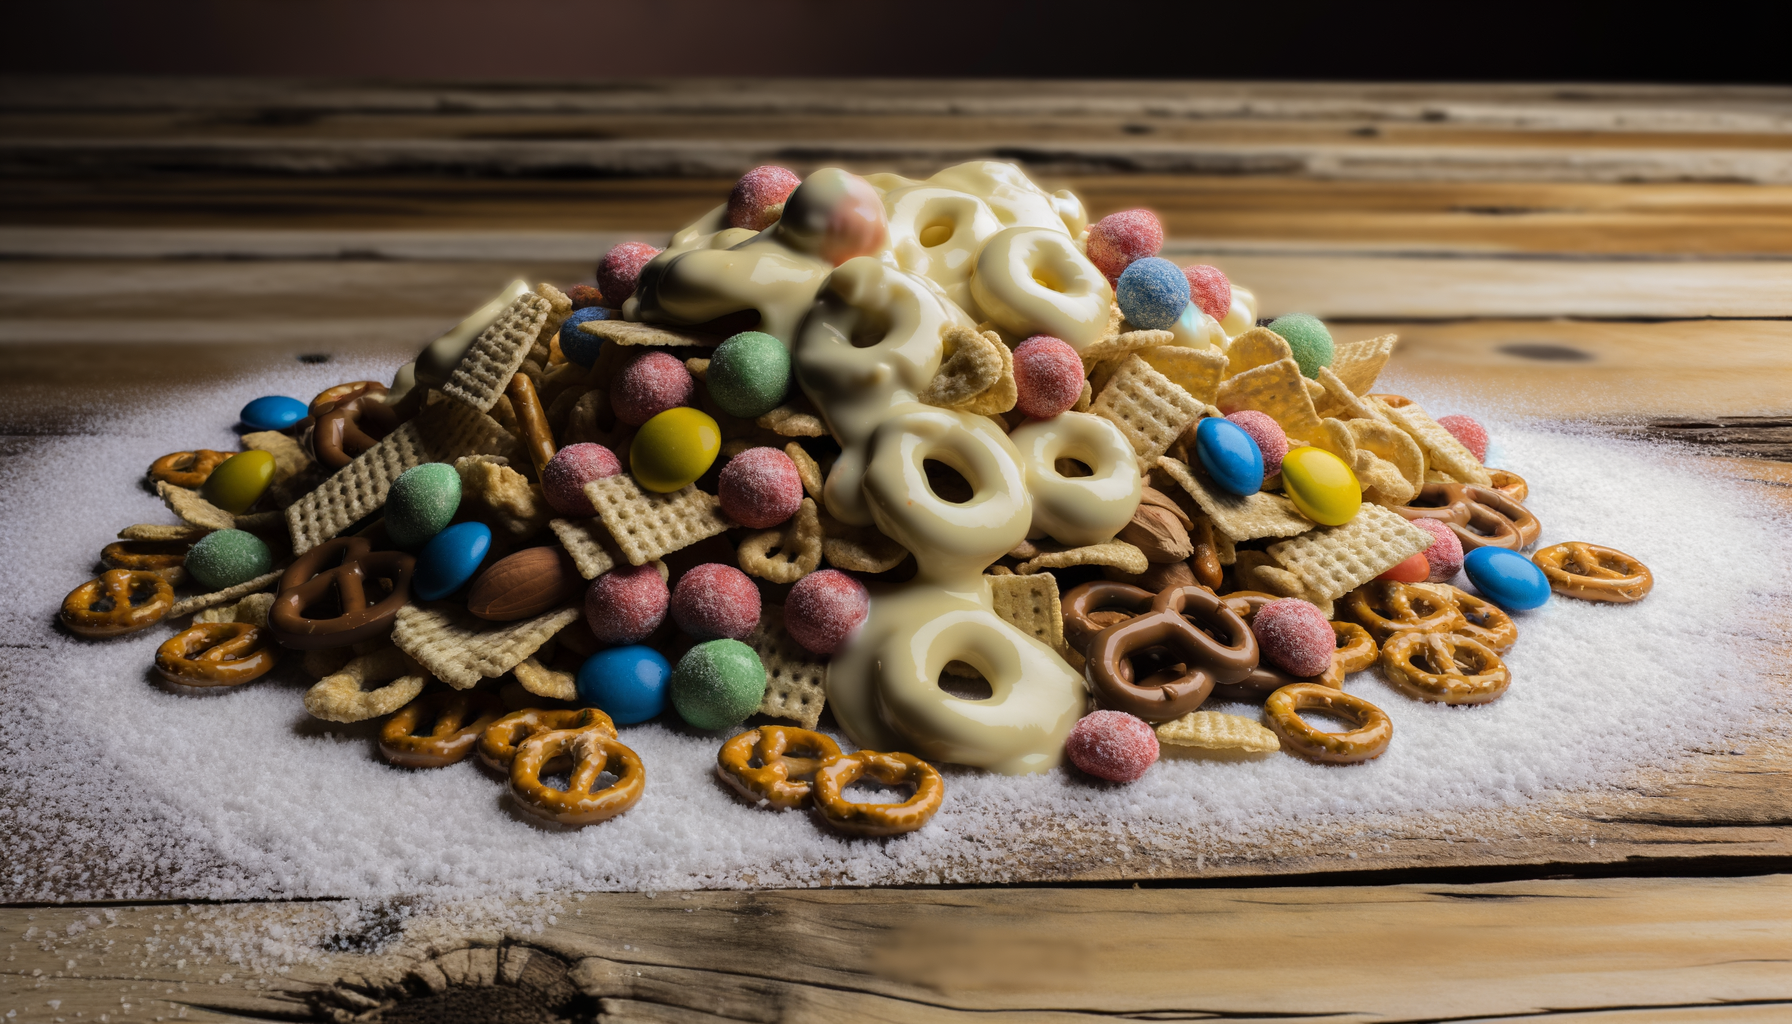 A delectable 'White Trash Recipe' snack mix with cereals, pretzels, peanuts, and colorful M&M's all coated in melted white chocolate, displayed on a rustic wooden table.